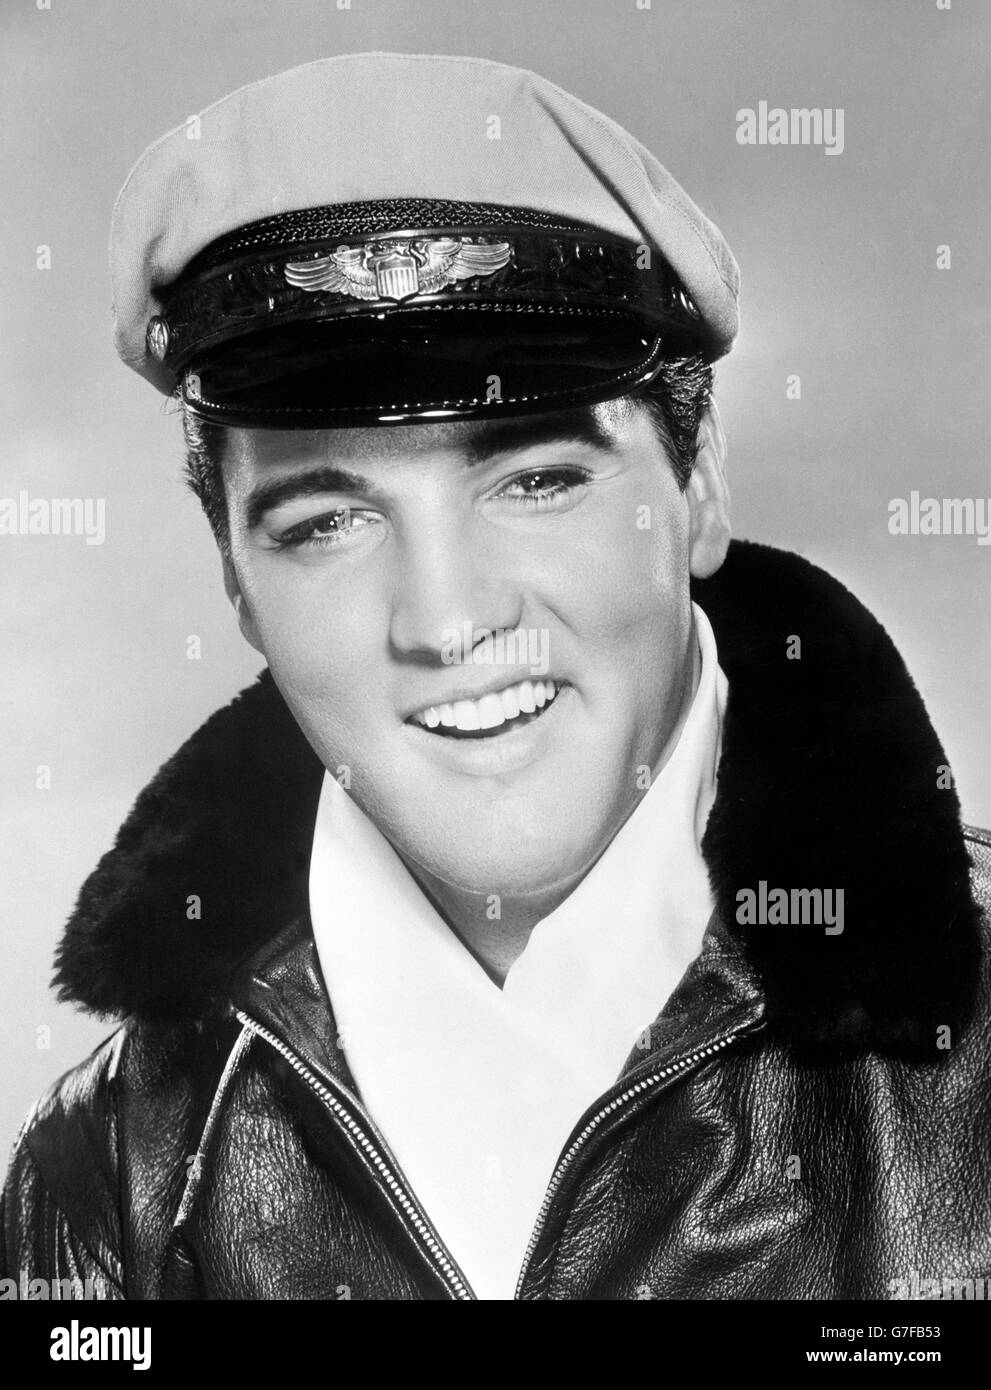 Film - It Happened at the World's Fair - Elvis Presley. Elvis Presley in character as an airman for his role in MGM's It Happened at the World's Fair. Stock Photo